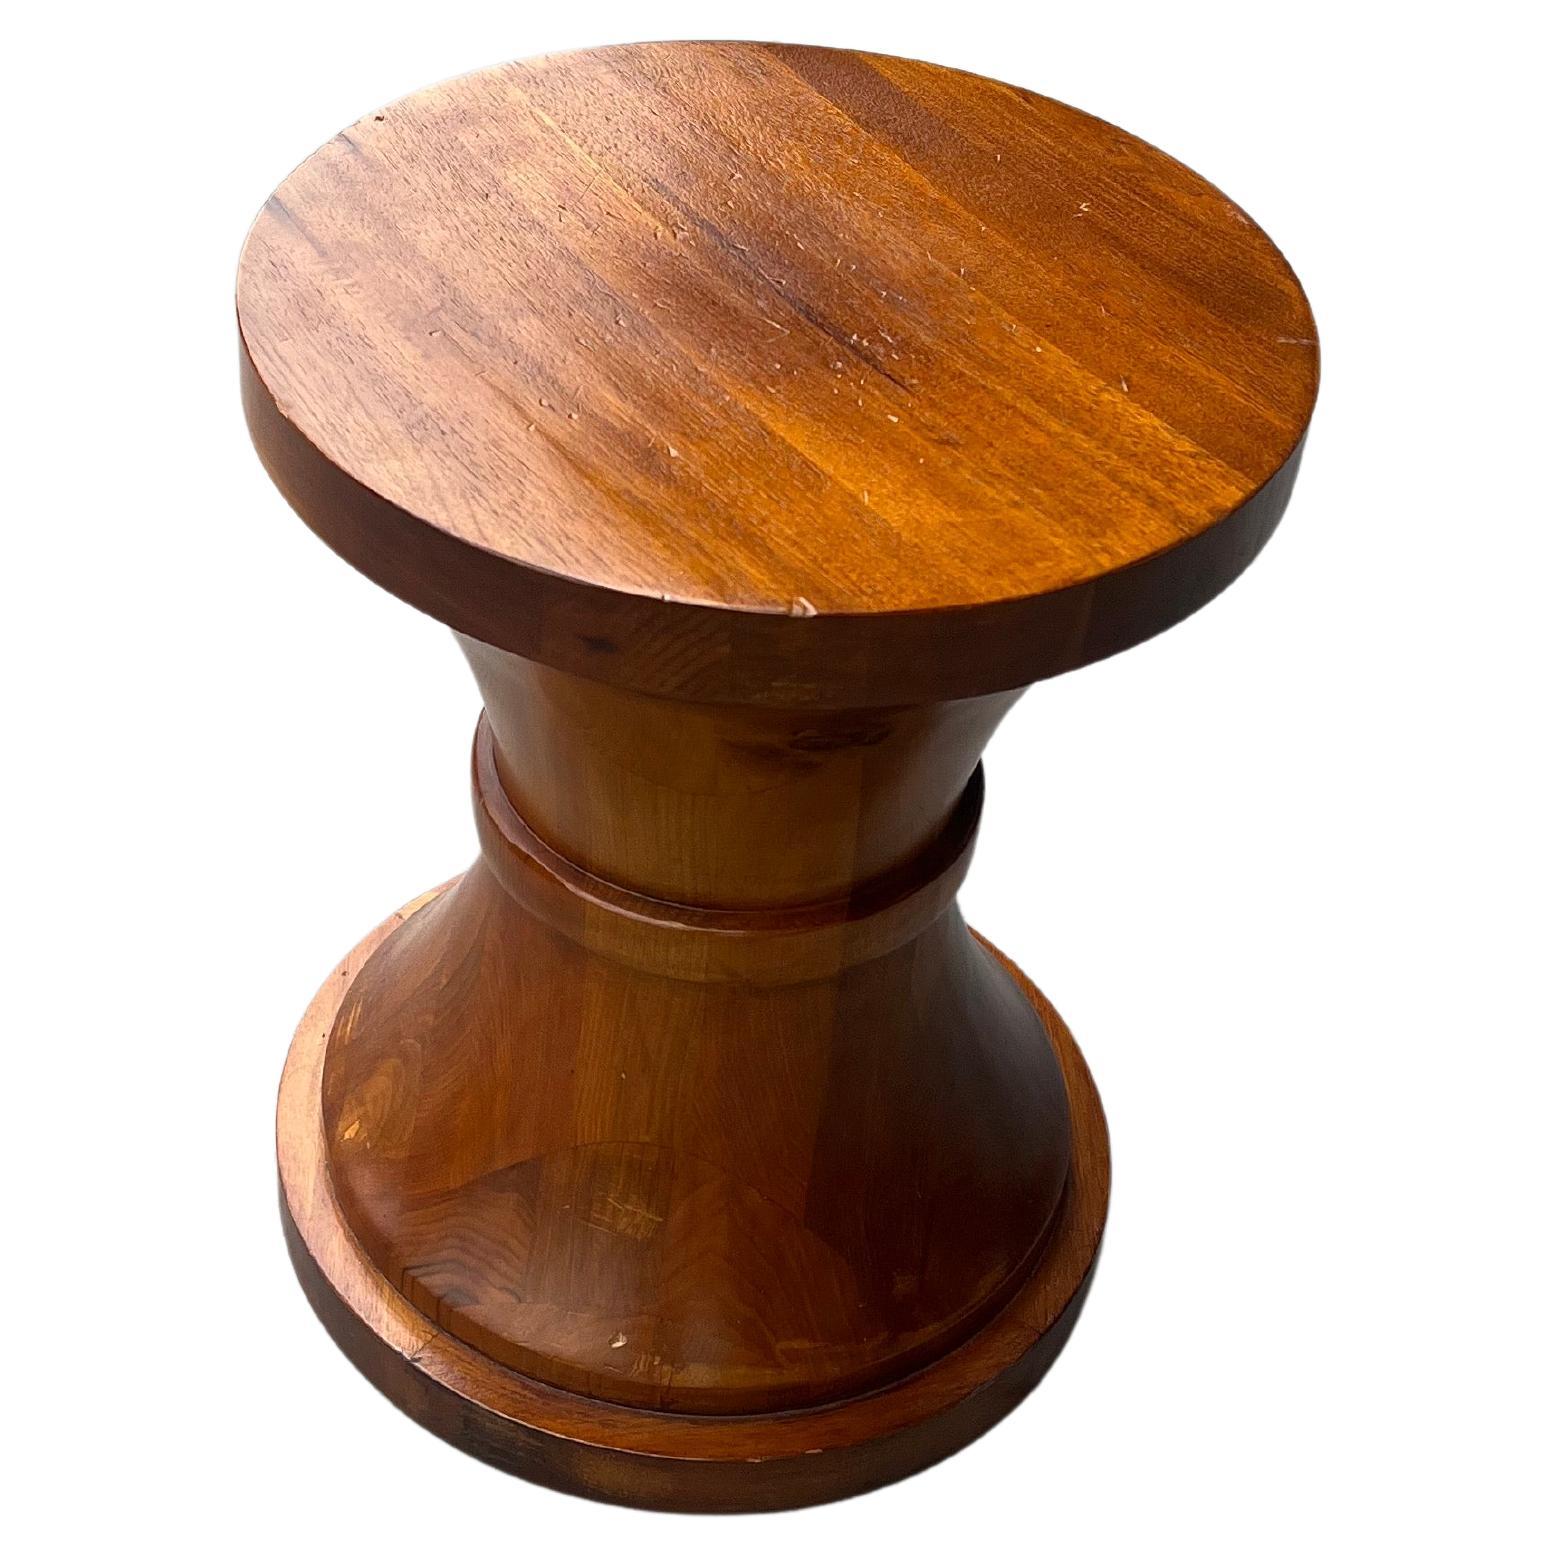 Beautiful elegant solid walnut stool , end table butcher block original finish some scuffs due to age great for table or extra sitting. solid and sturdy.